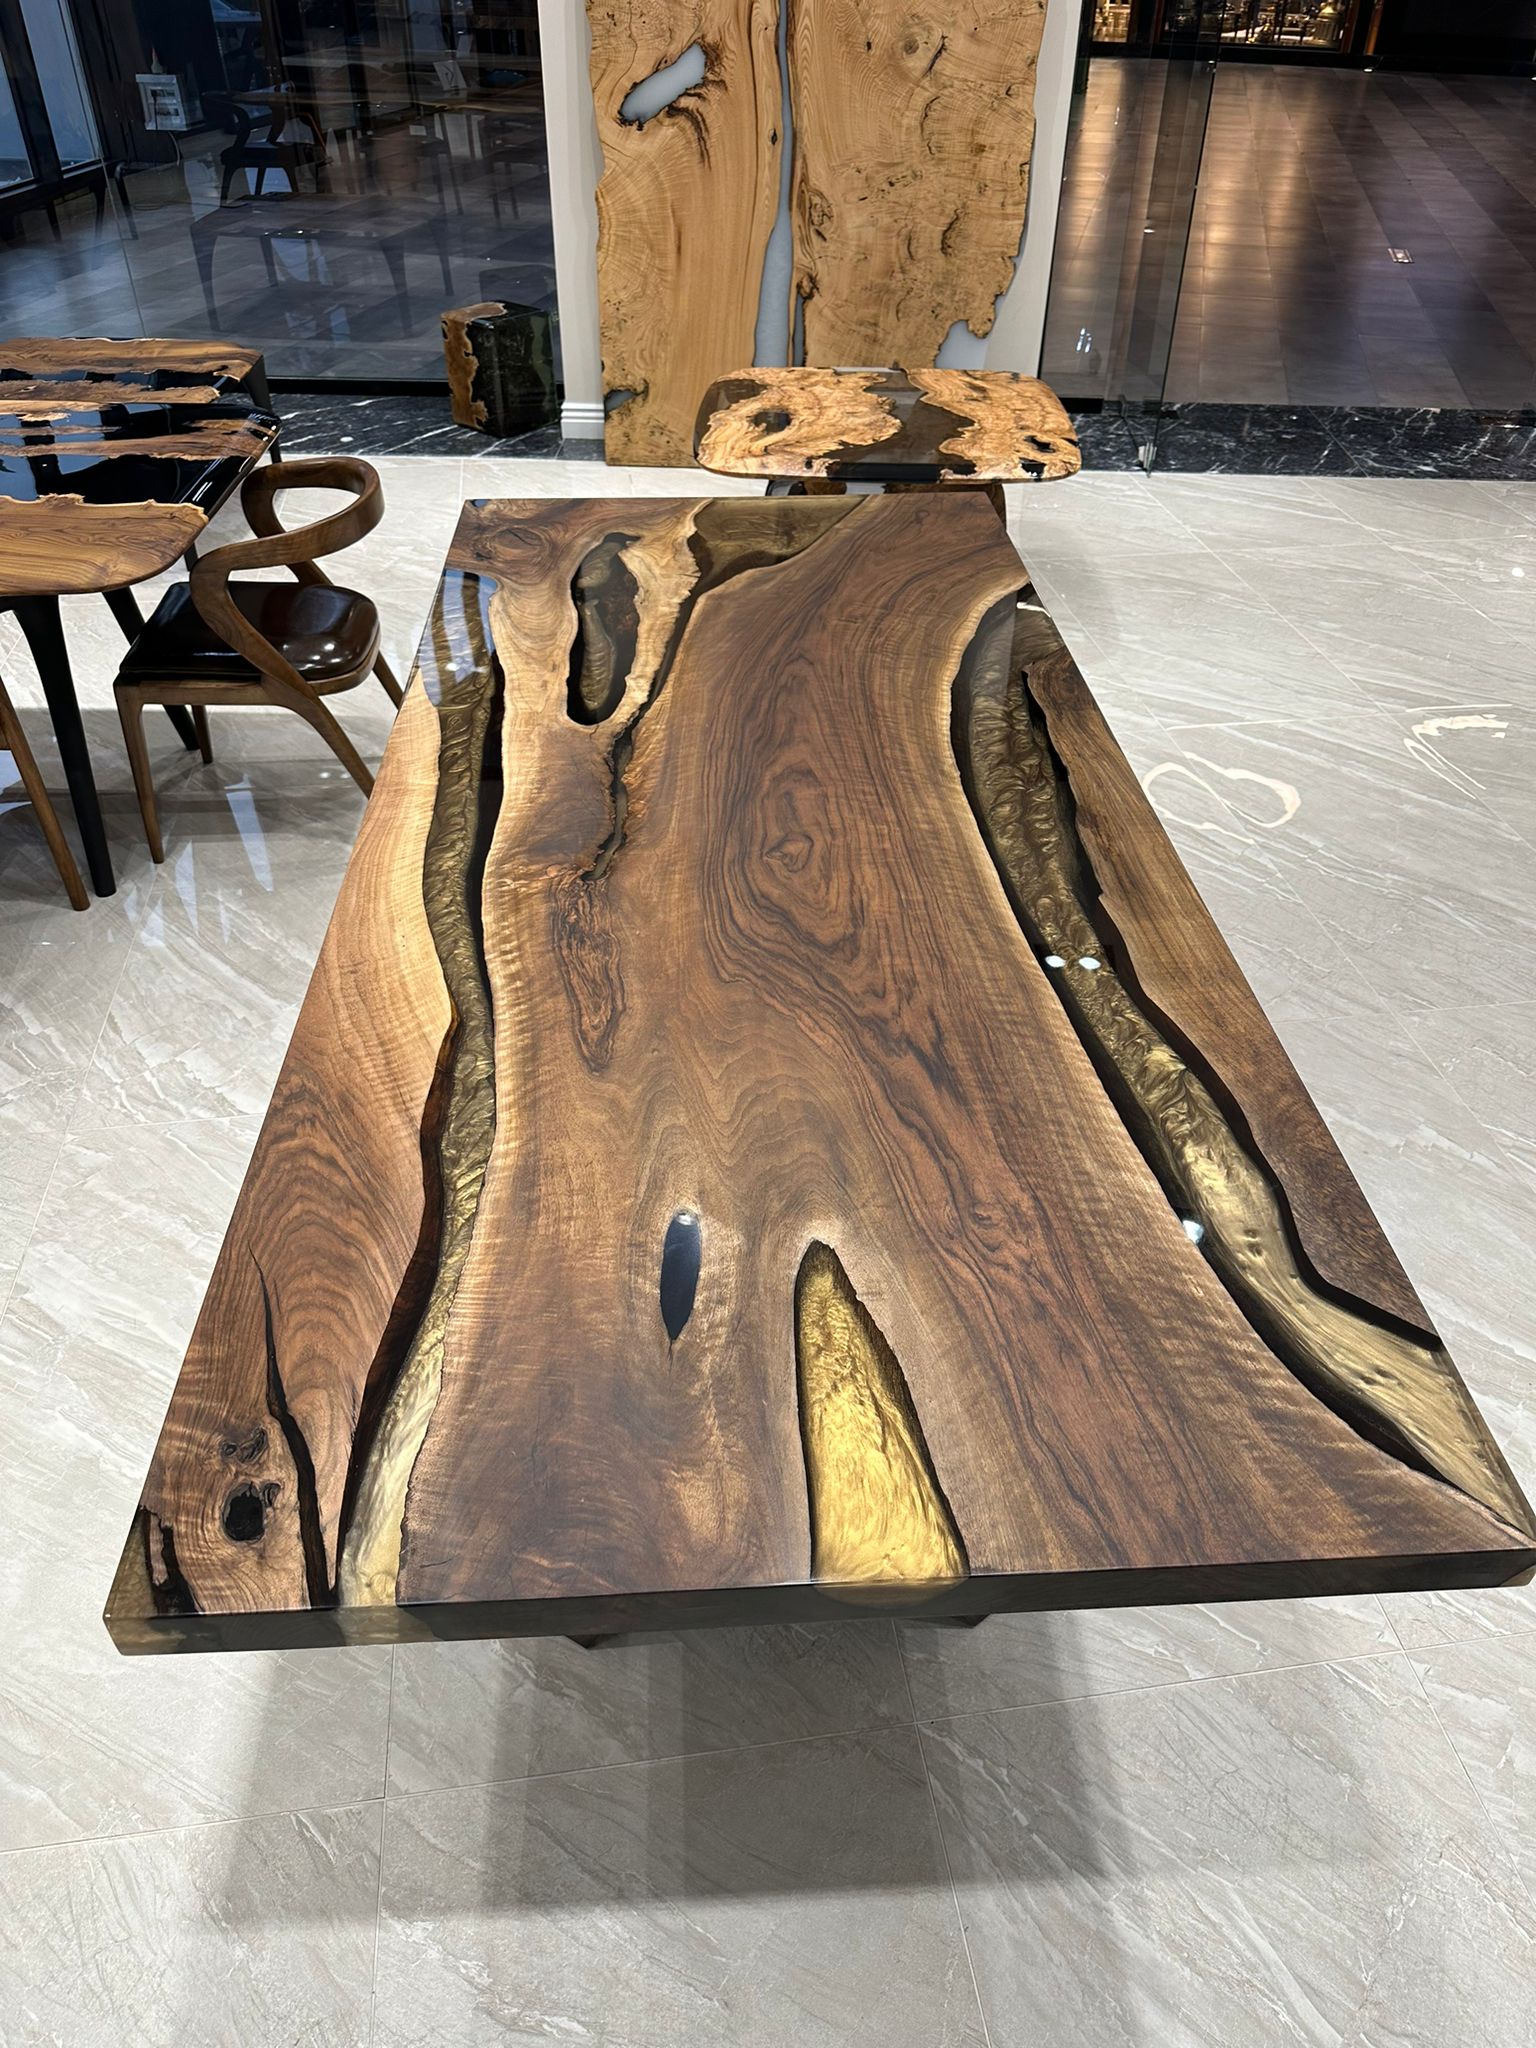 walnut dining table, epoxy dining table, epoxy dining table austria, epoxy,epoxy river table, river table, river, epoxy resin table, custom made furniture, exclusive tables, epoxy table, johannes forkl, forkl, oh my deer, omd, buy epoxy table, buy epoxy table austria, epoxy tables, epoxy tables, epoxy table river, epoxy dining table, epoxy table walnut wood, epoxy dining table gold metallic